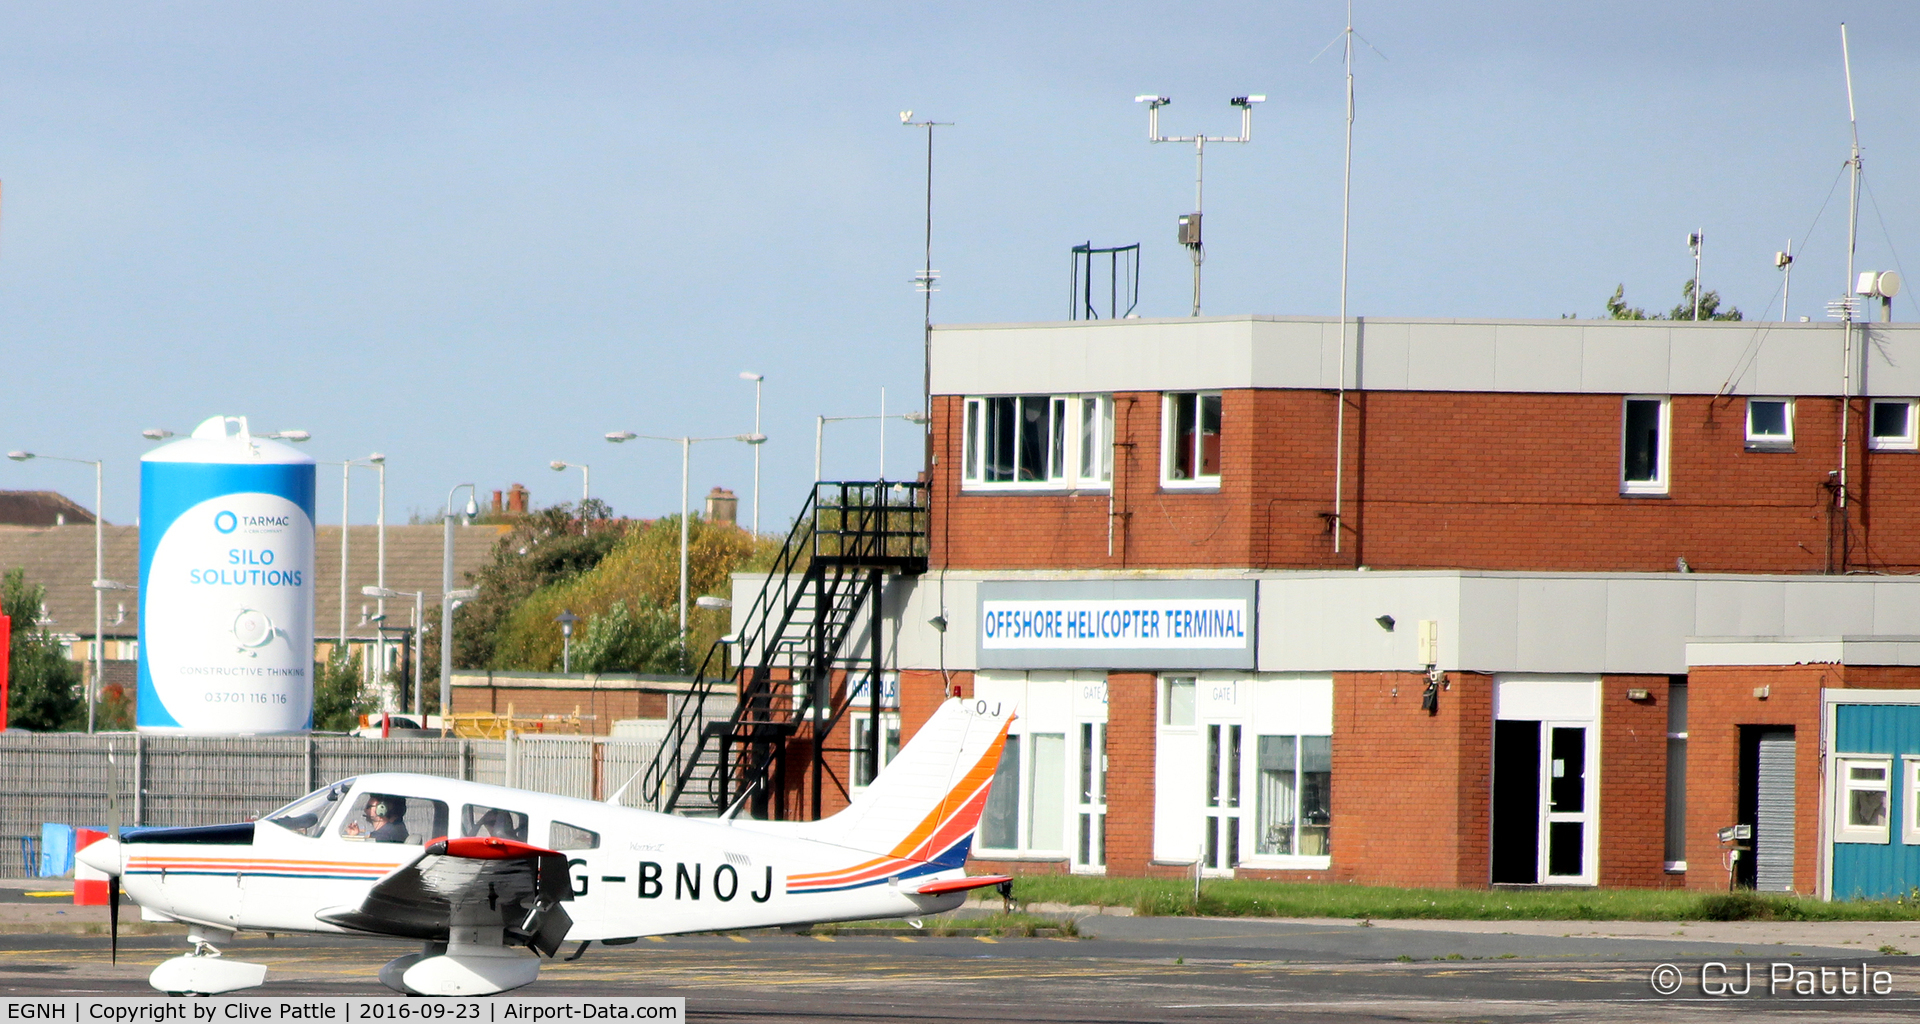 Blackpool International Airport, Blackpool, England United Kingdom (EGNH) - The Offshore Terminal at Blackpool EGNH - In daily use by the resident Bond Helicopters serving the Morecambe Bay Oil Fields.